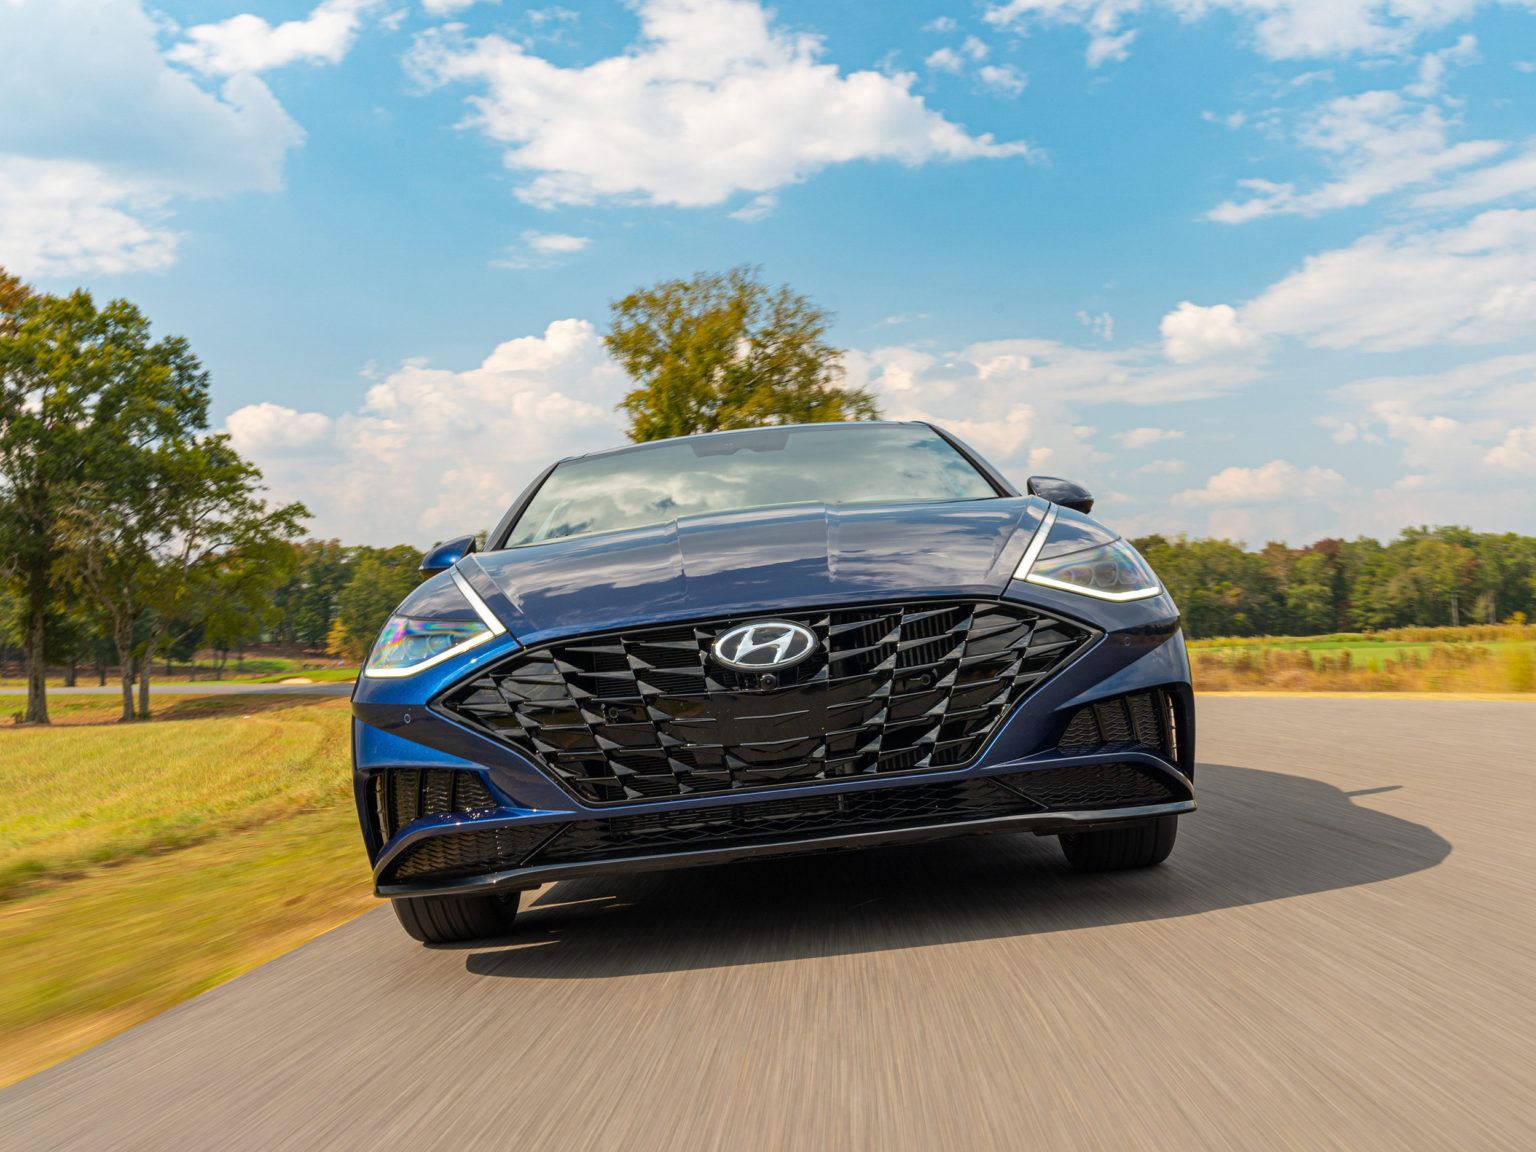 Hyundai is giving new car and SUV buyers a complementary maintenance plan with their purchase.